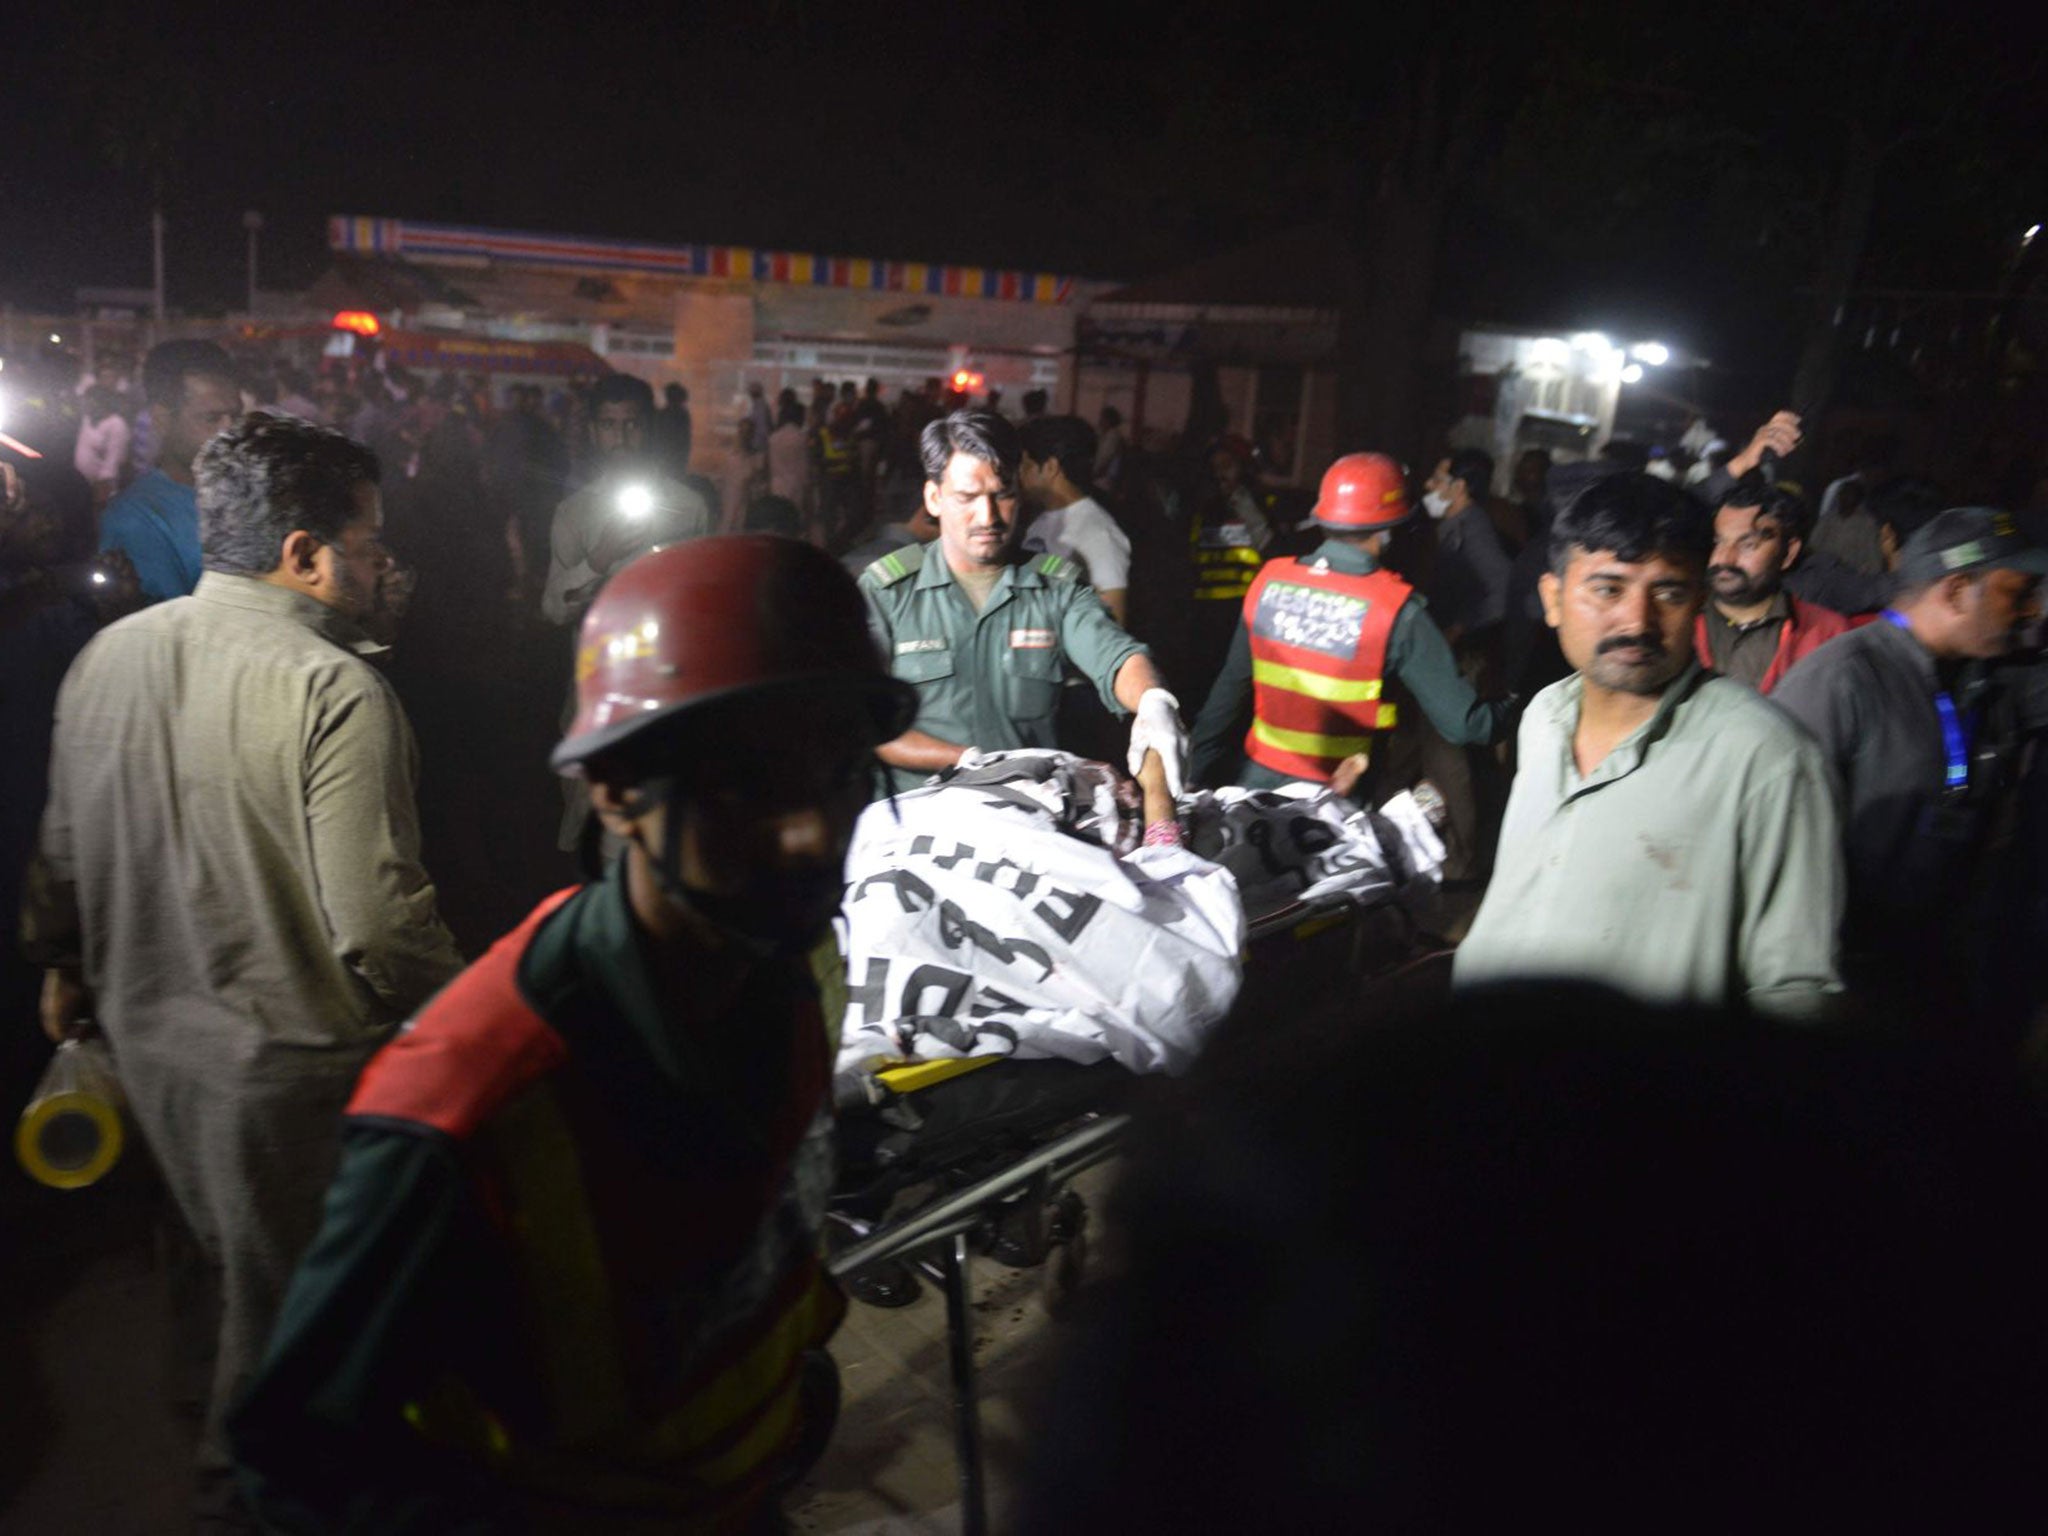 Emergency services tending to victims at the park following the explosion in Lahore